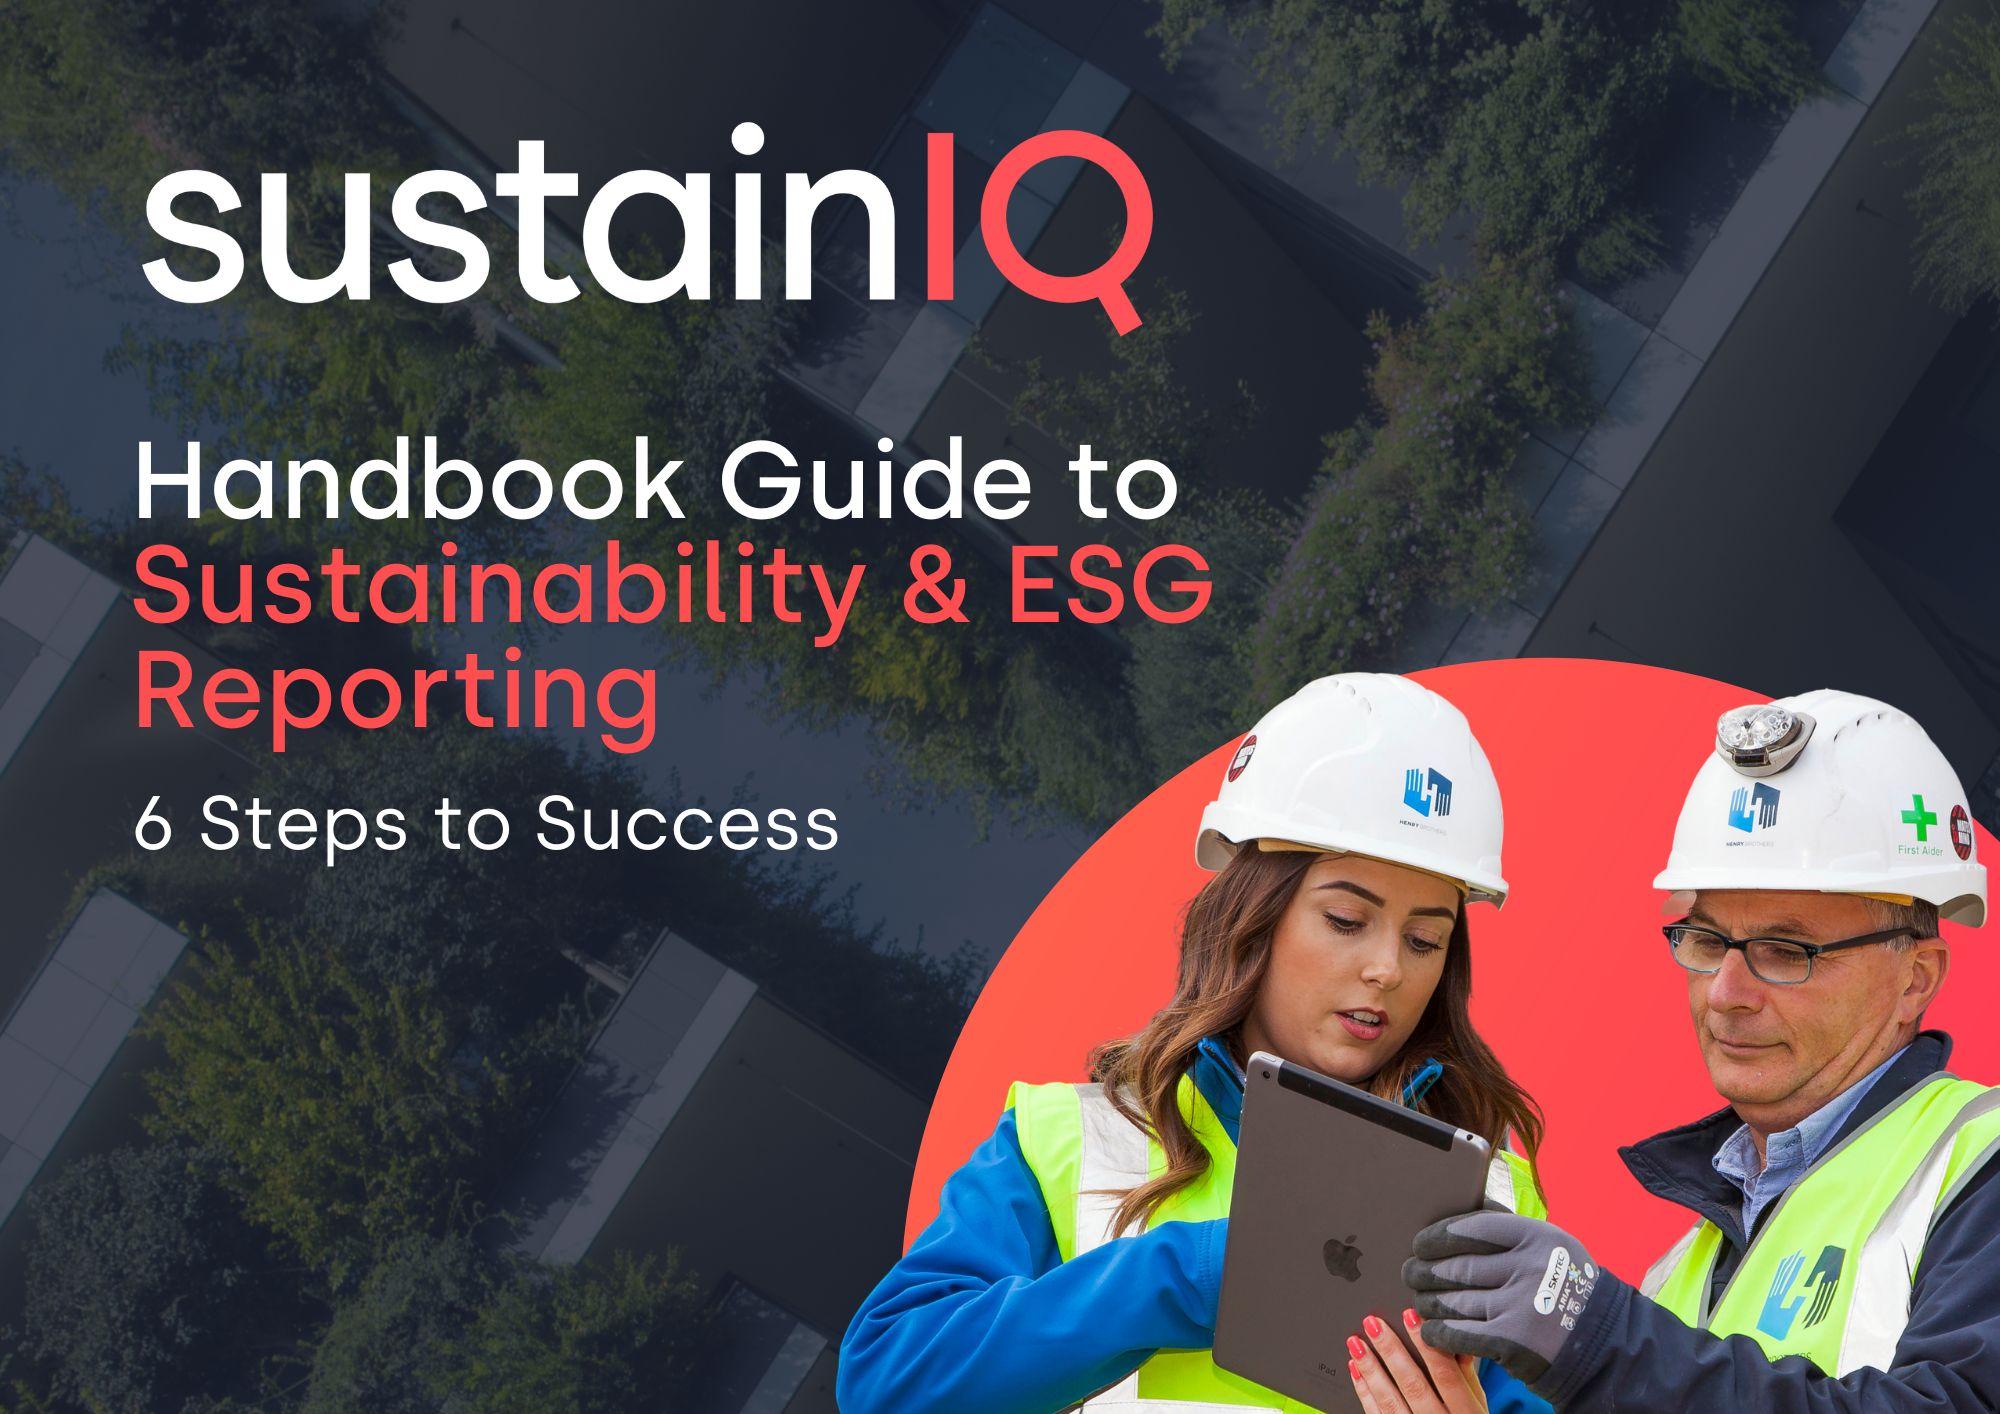 6 Steps to Sustainability & ESG Reporting